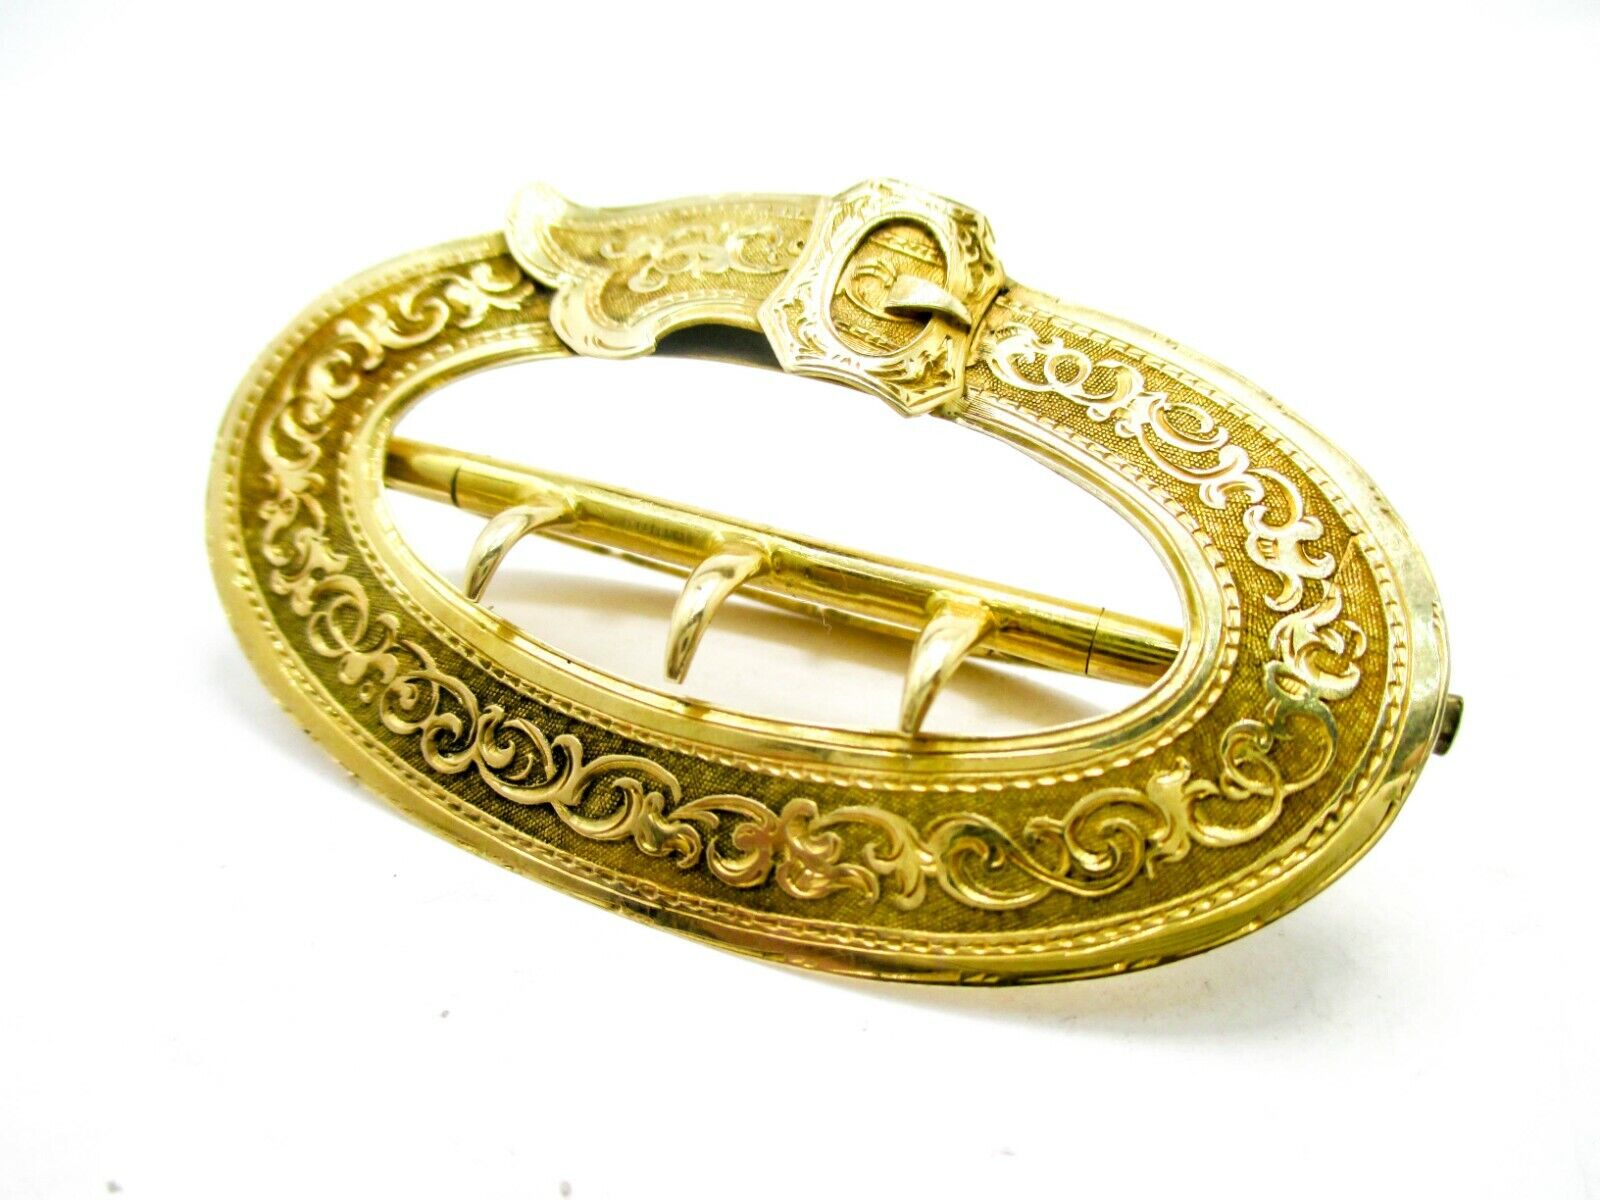 14k Yellow Gold Victorian Garter Belt Sash Buckle Museum Quality Hand Chased